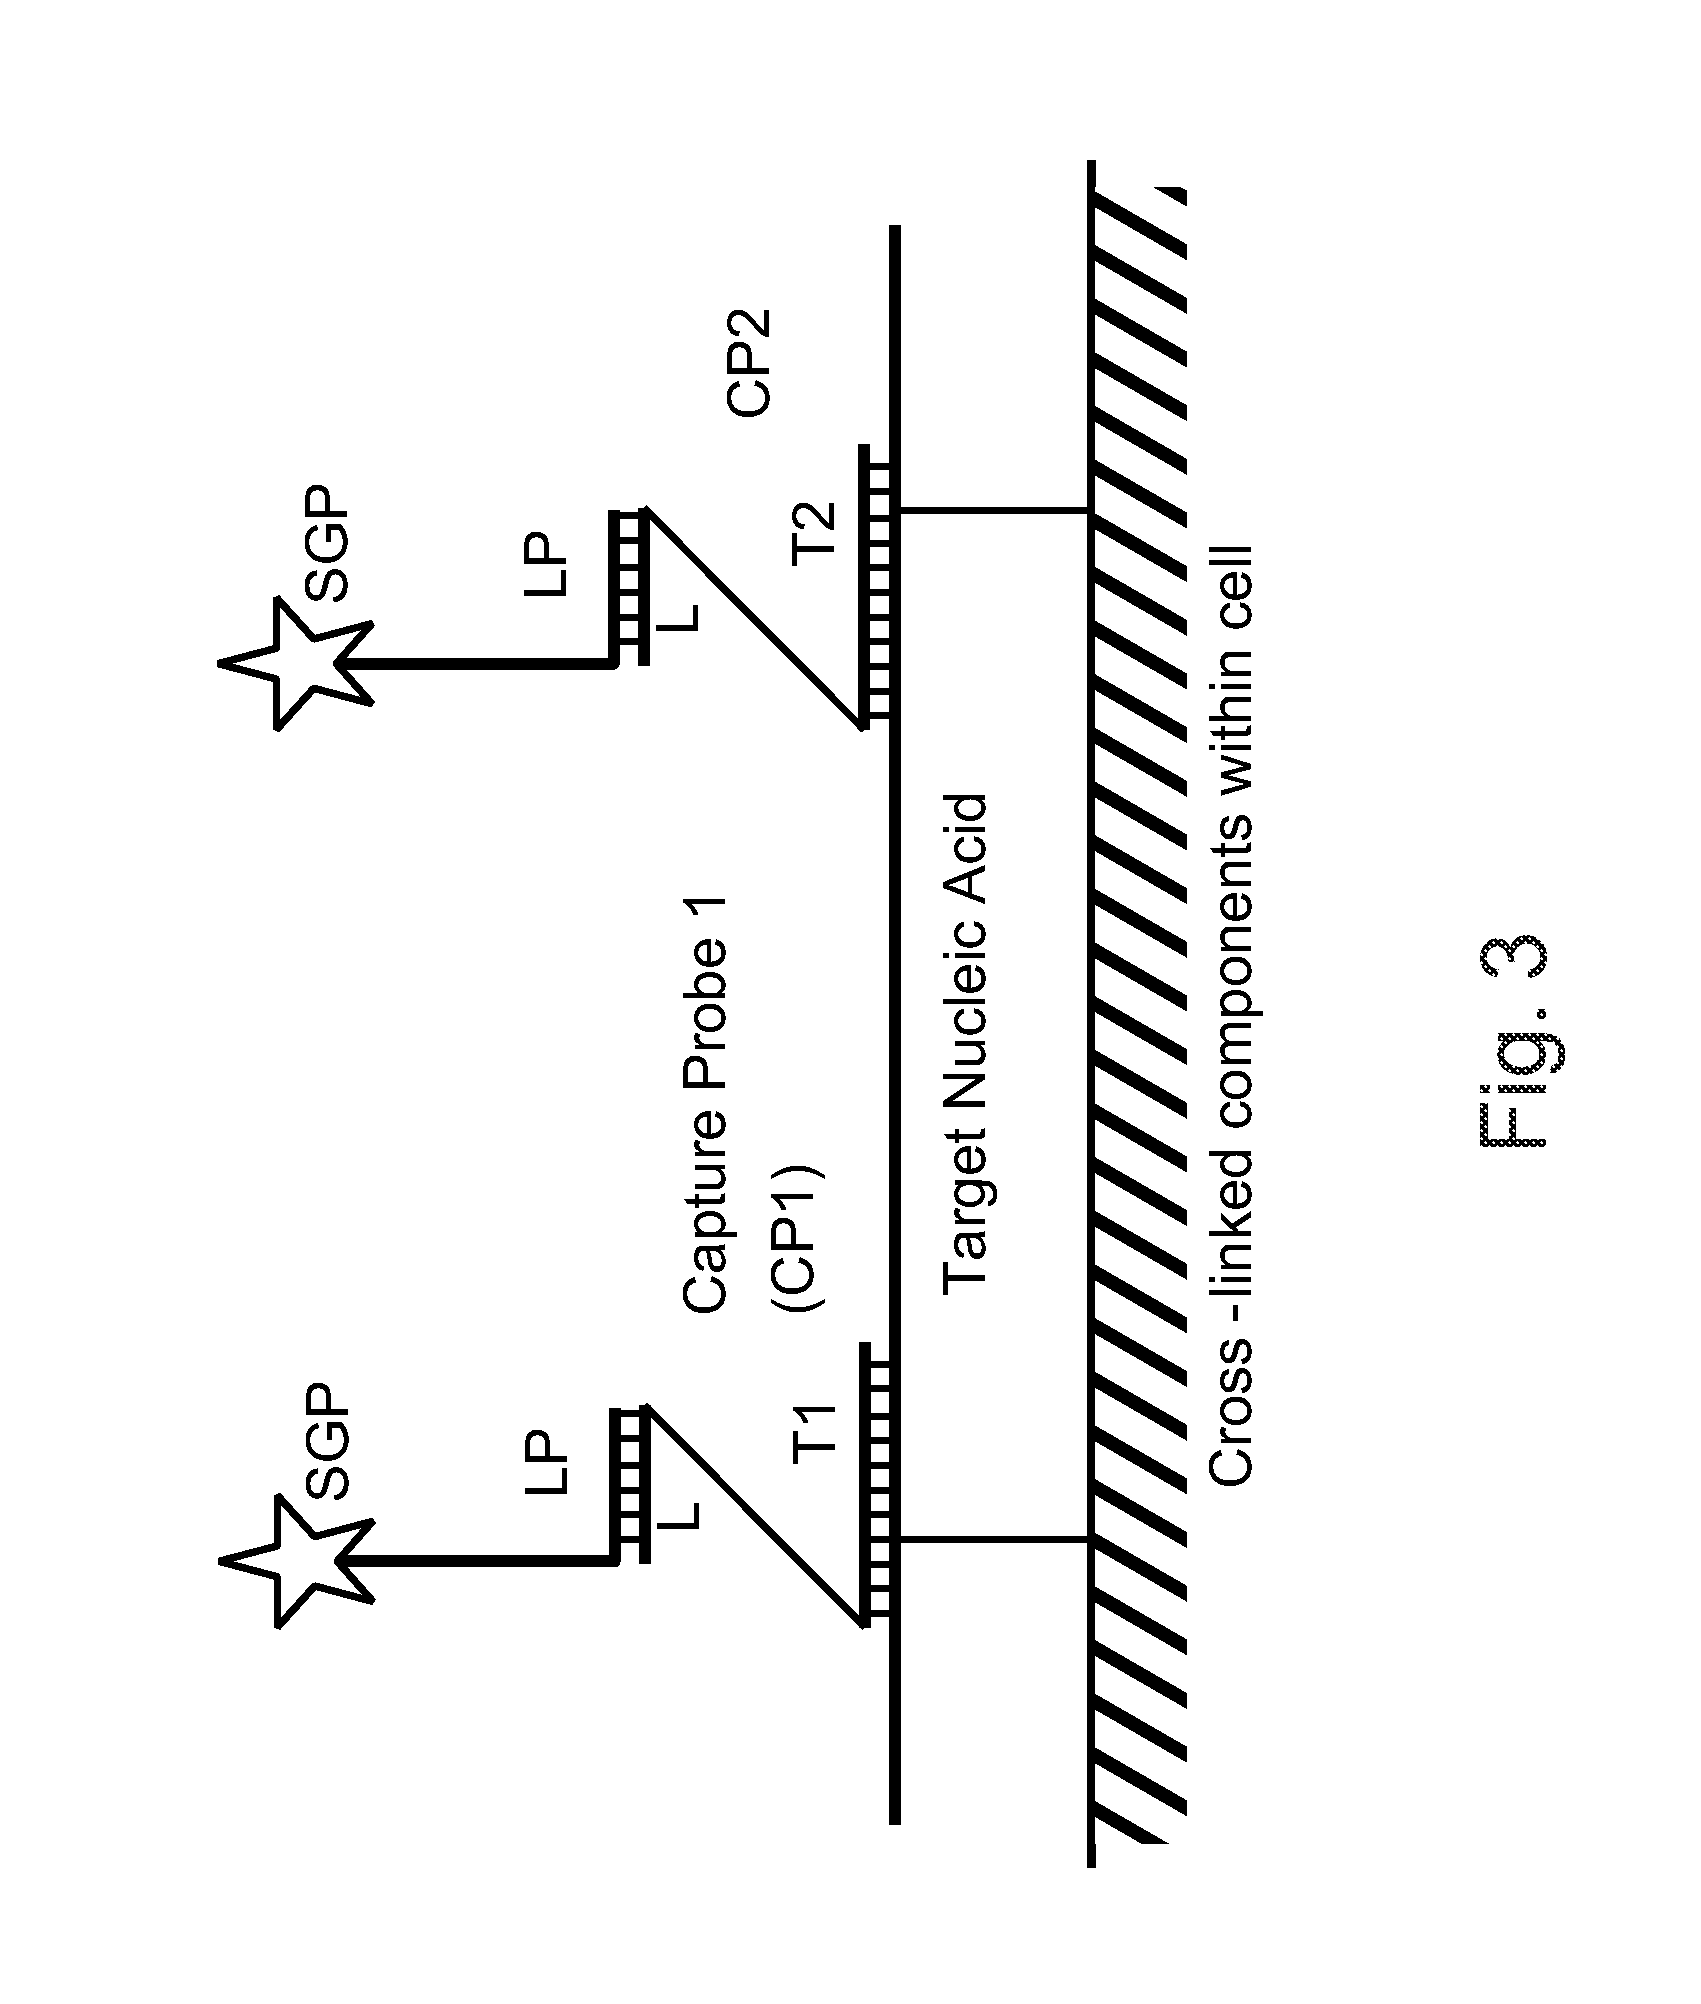 Methods of detecting nucleic acid sequences with high specificity